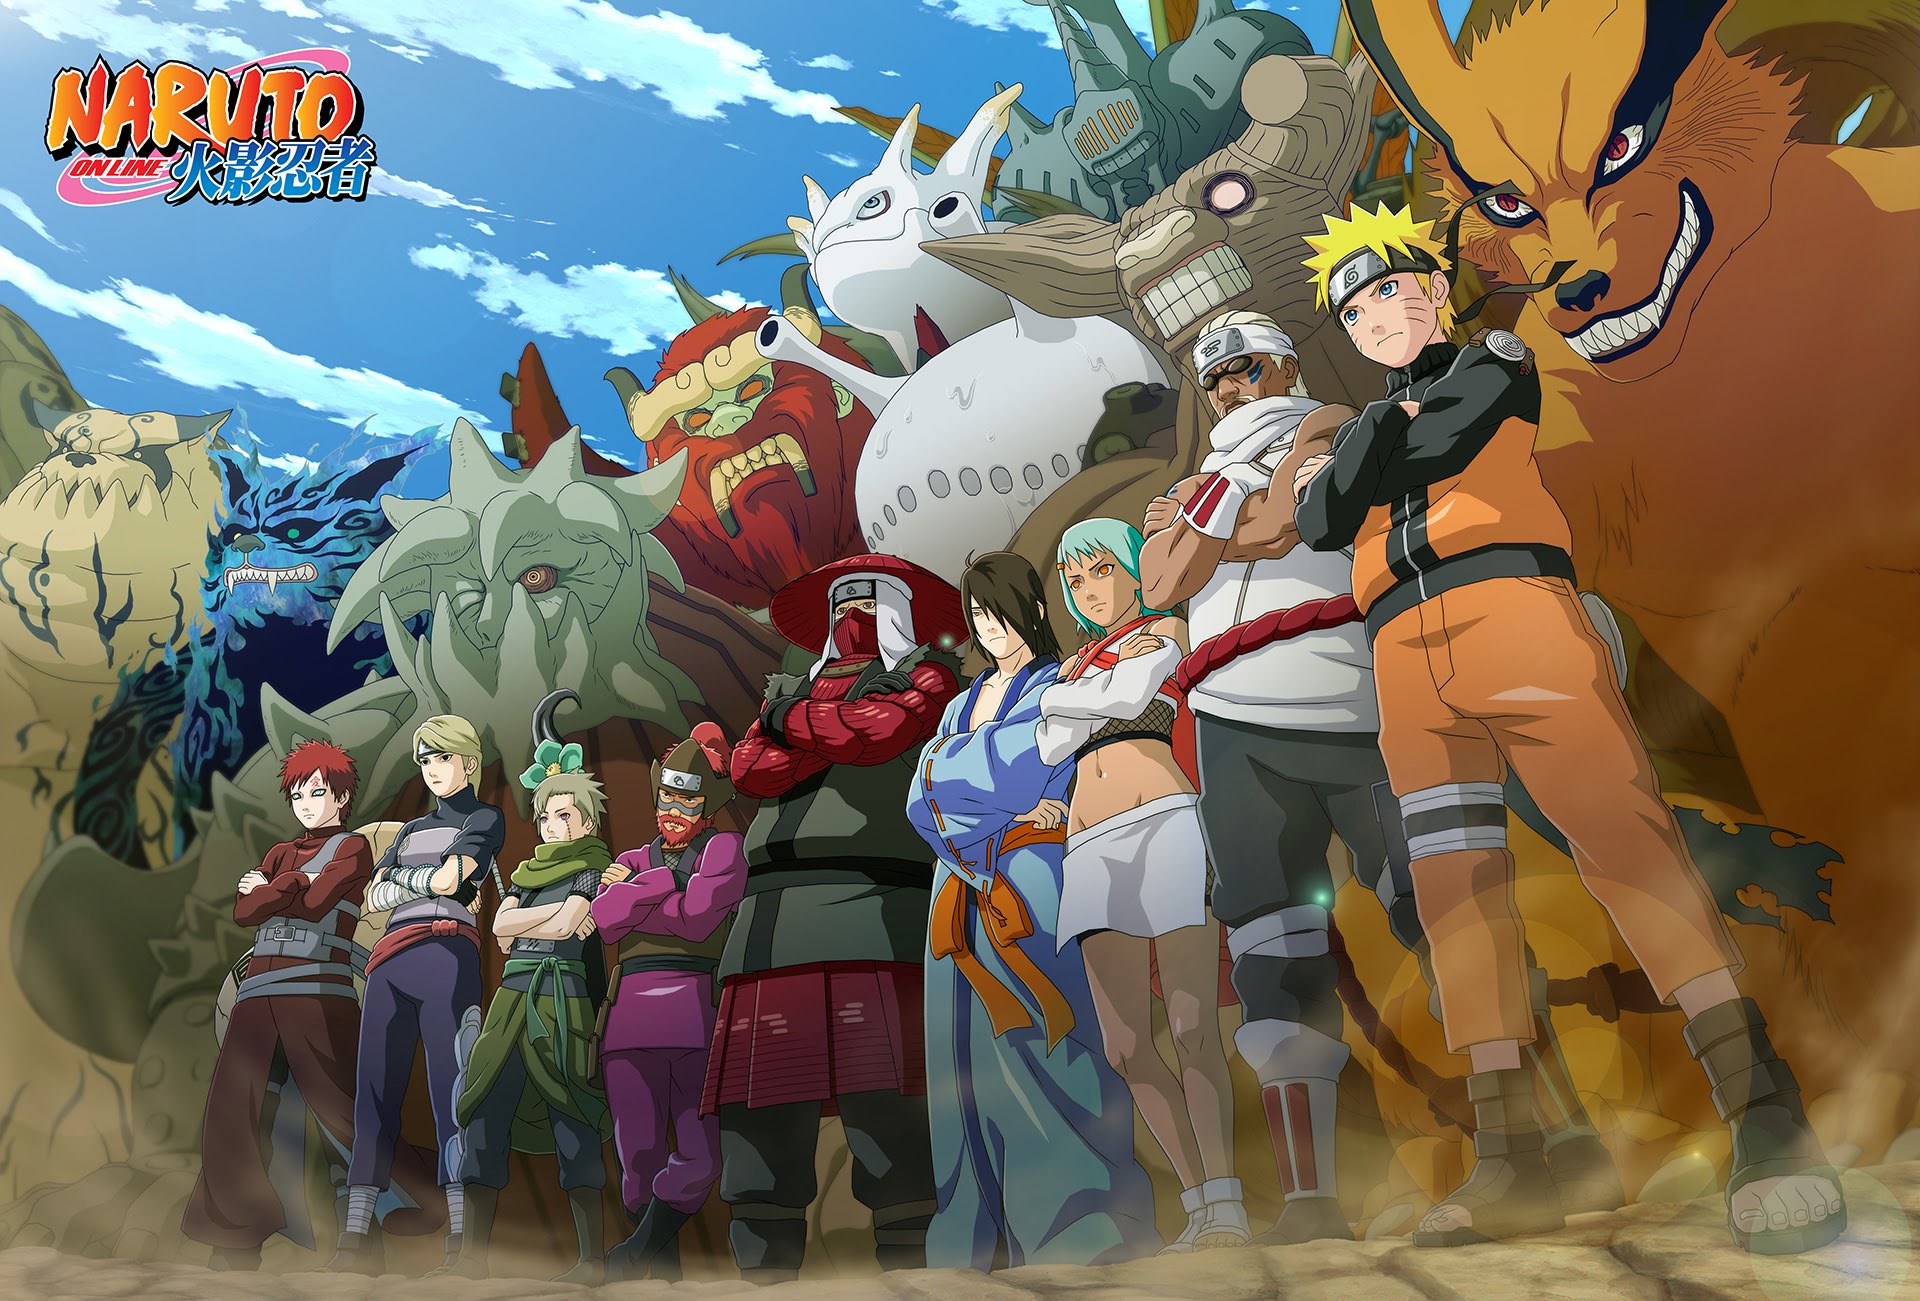 Naruto Online, An MMORPG Based On The Anime Series, Has Arrived - Hey Poor  Player